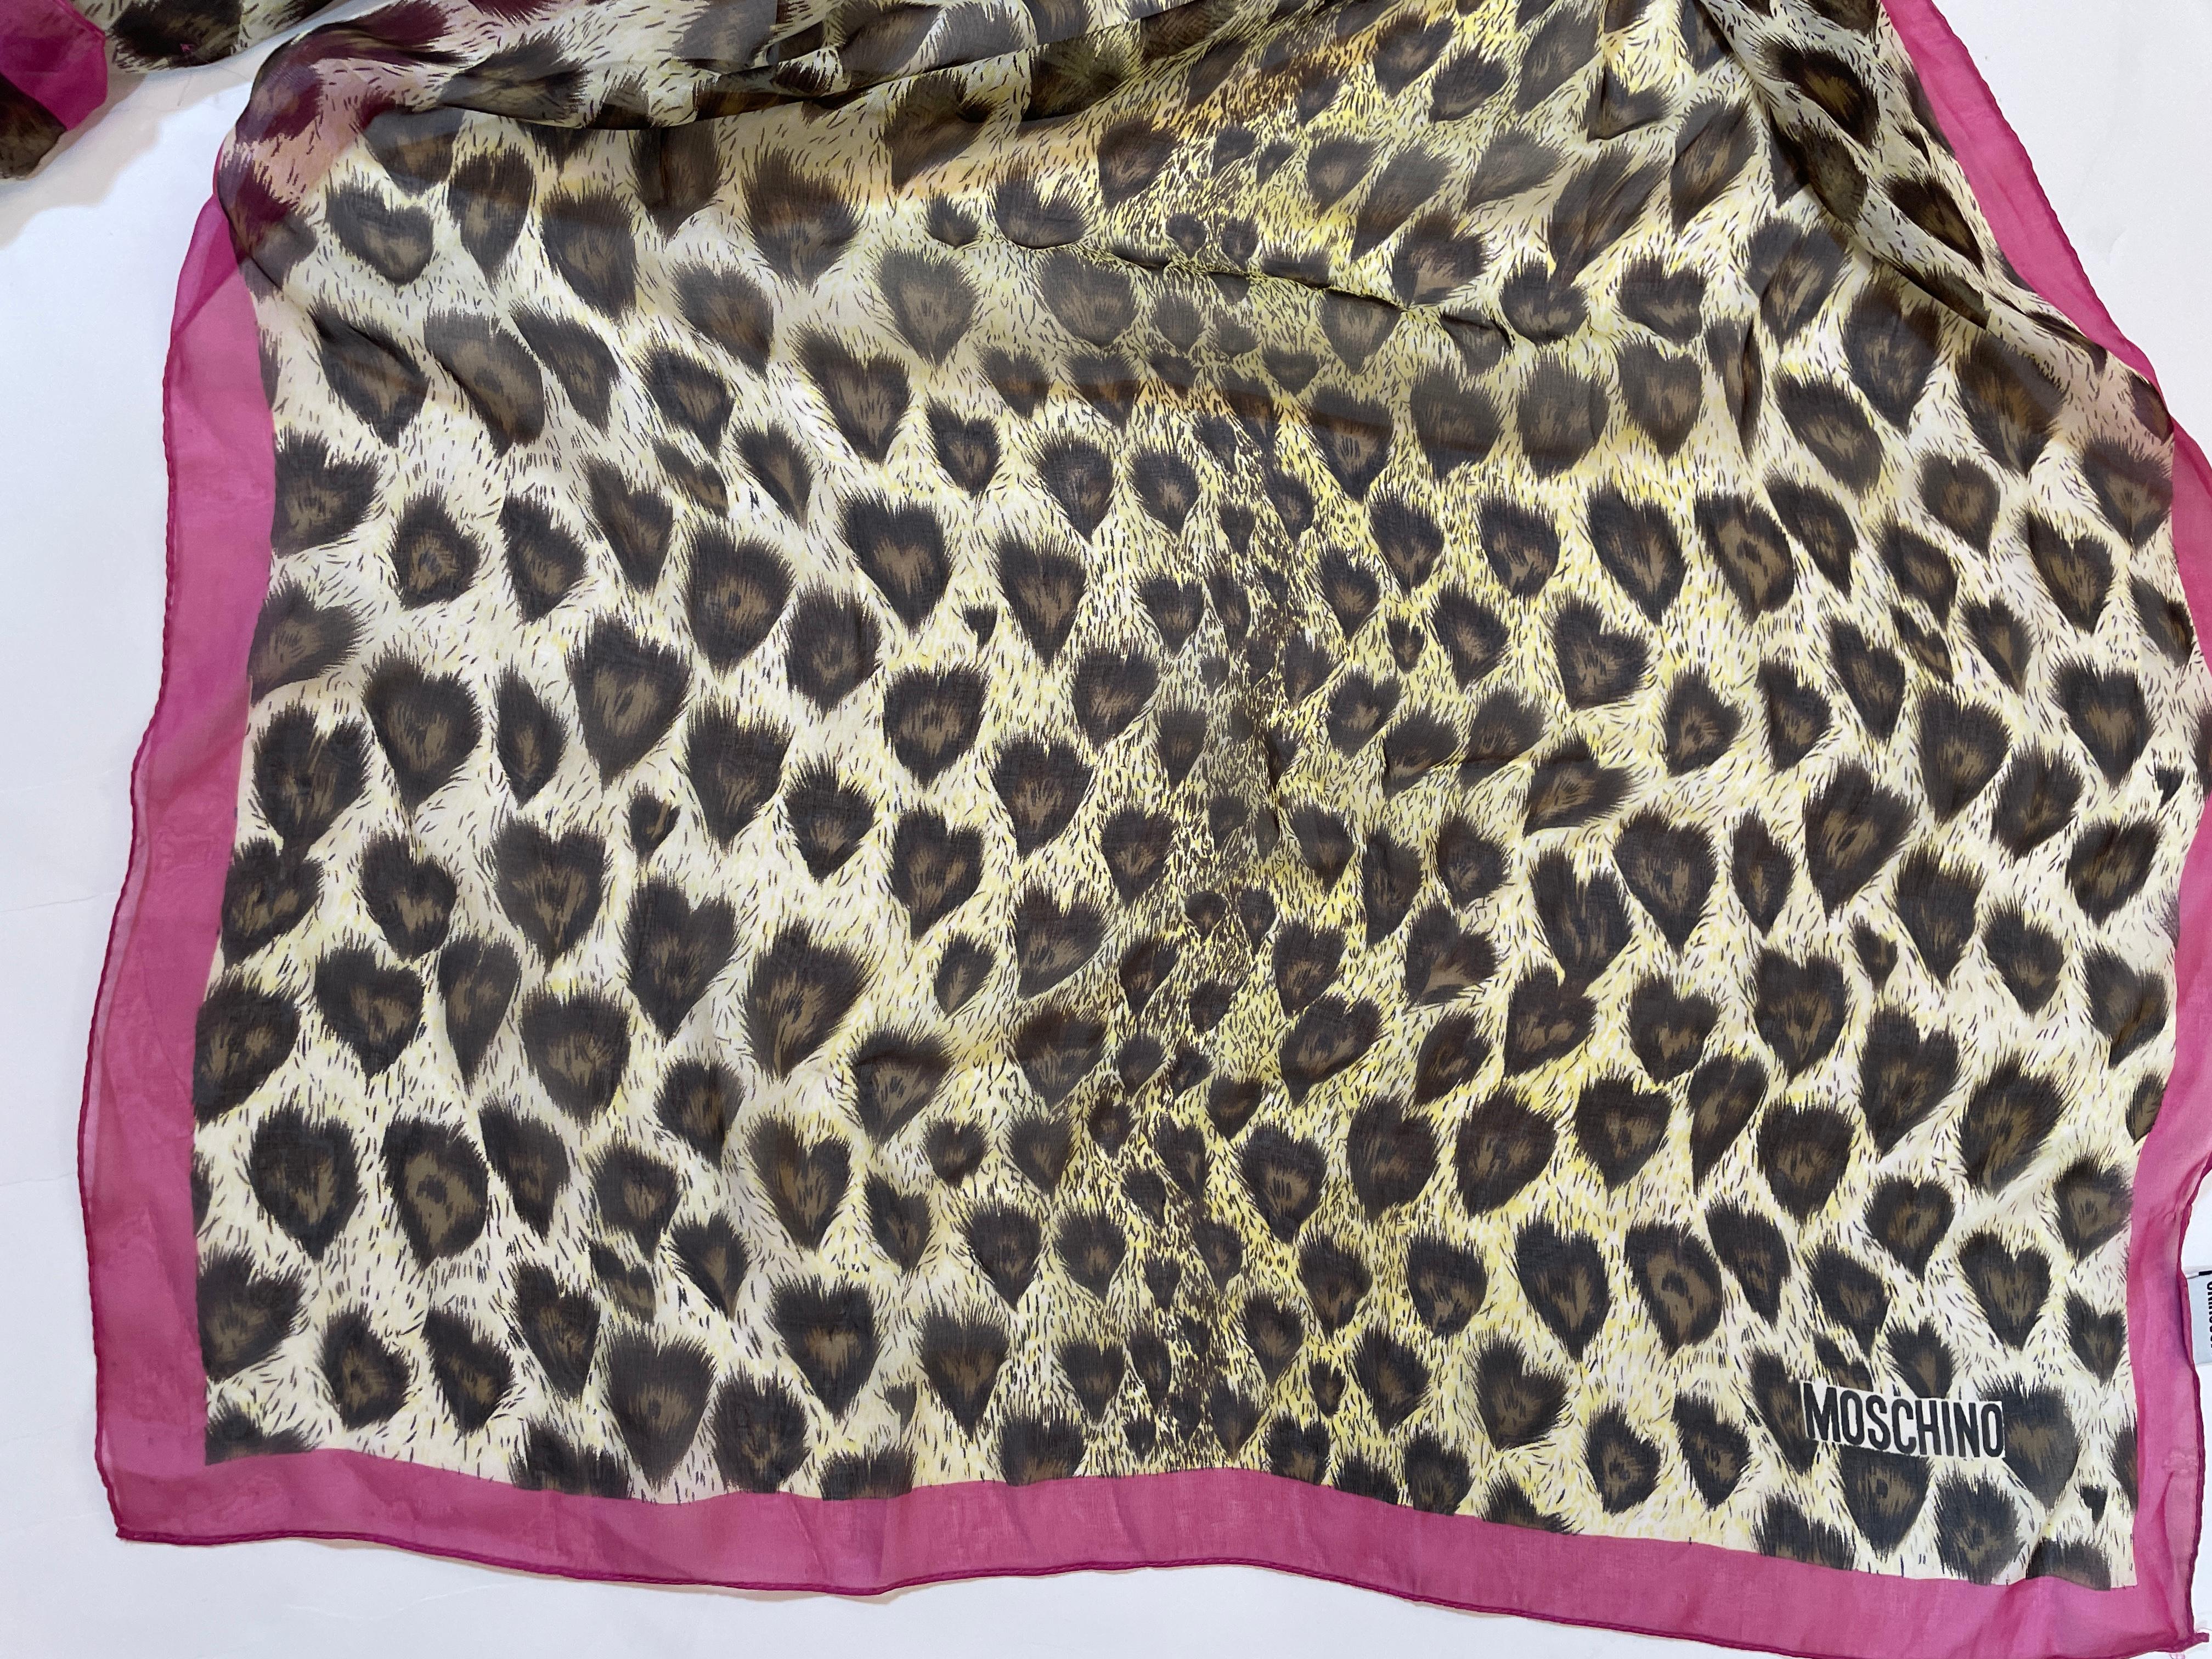 Moschino Animal Print Silk Scarf Made In Italy Pink And Brown 1990s Head Wrap For Sale 5